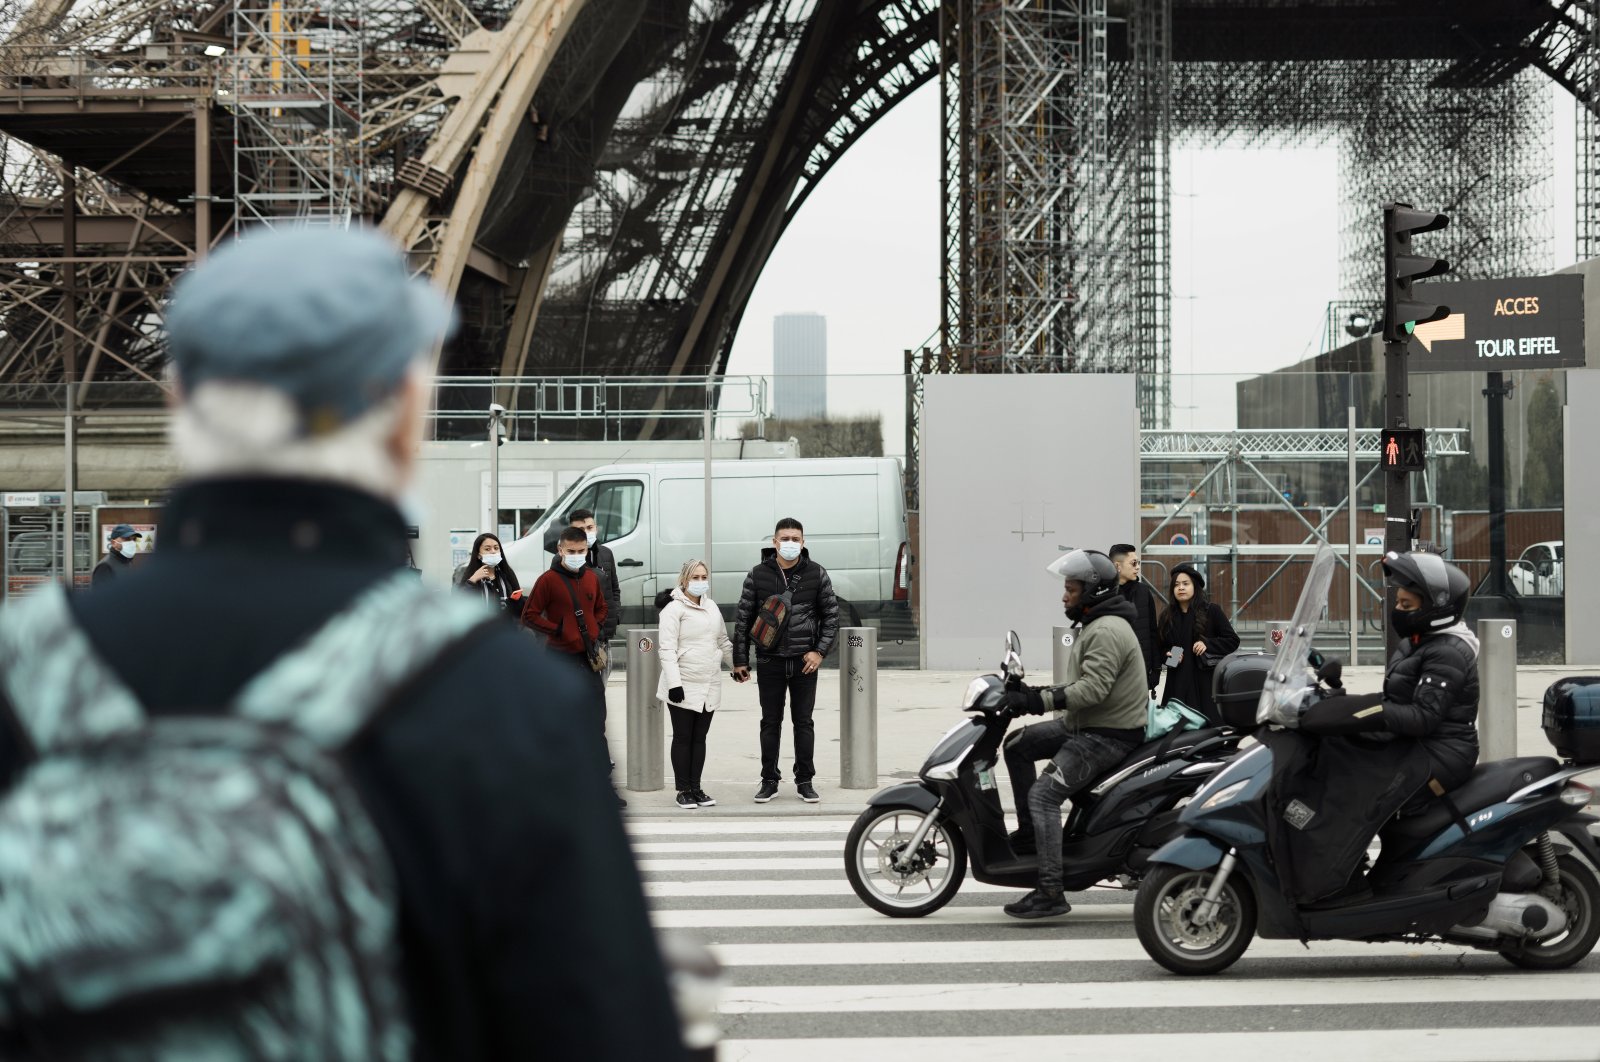 Pedestrians wear masks to prevent the spread of the COVID-19 as they wait at a crosswalk, near the Eiffel Tower, in Paris, France, Dec. 14, 2021. (AP Photo)